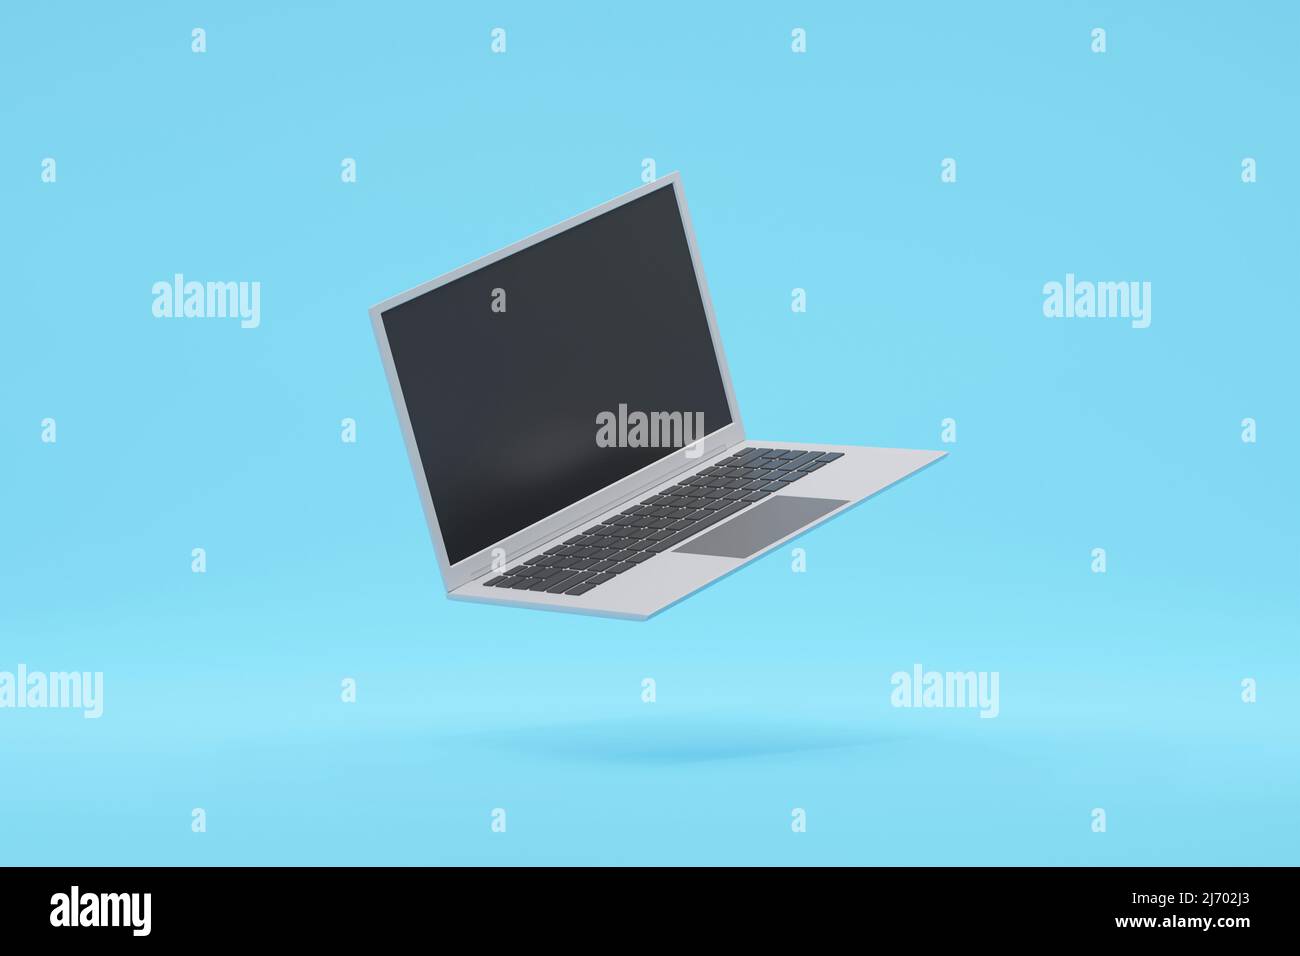 Laptop notebook computer floating in the air, technology equipment background, 3d rendering. Stock Photo